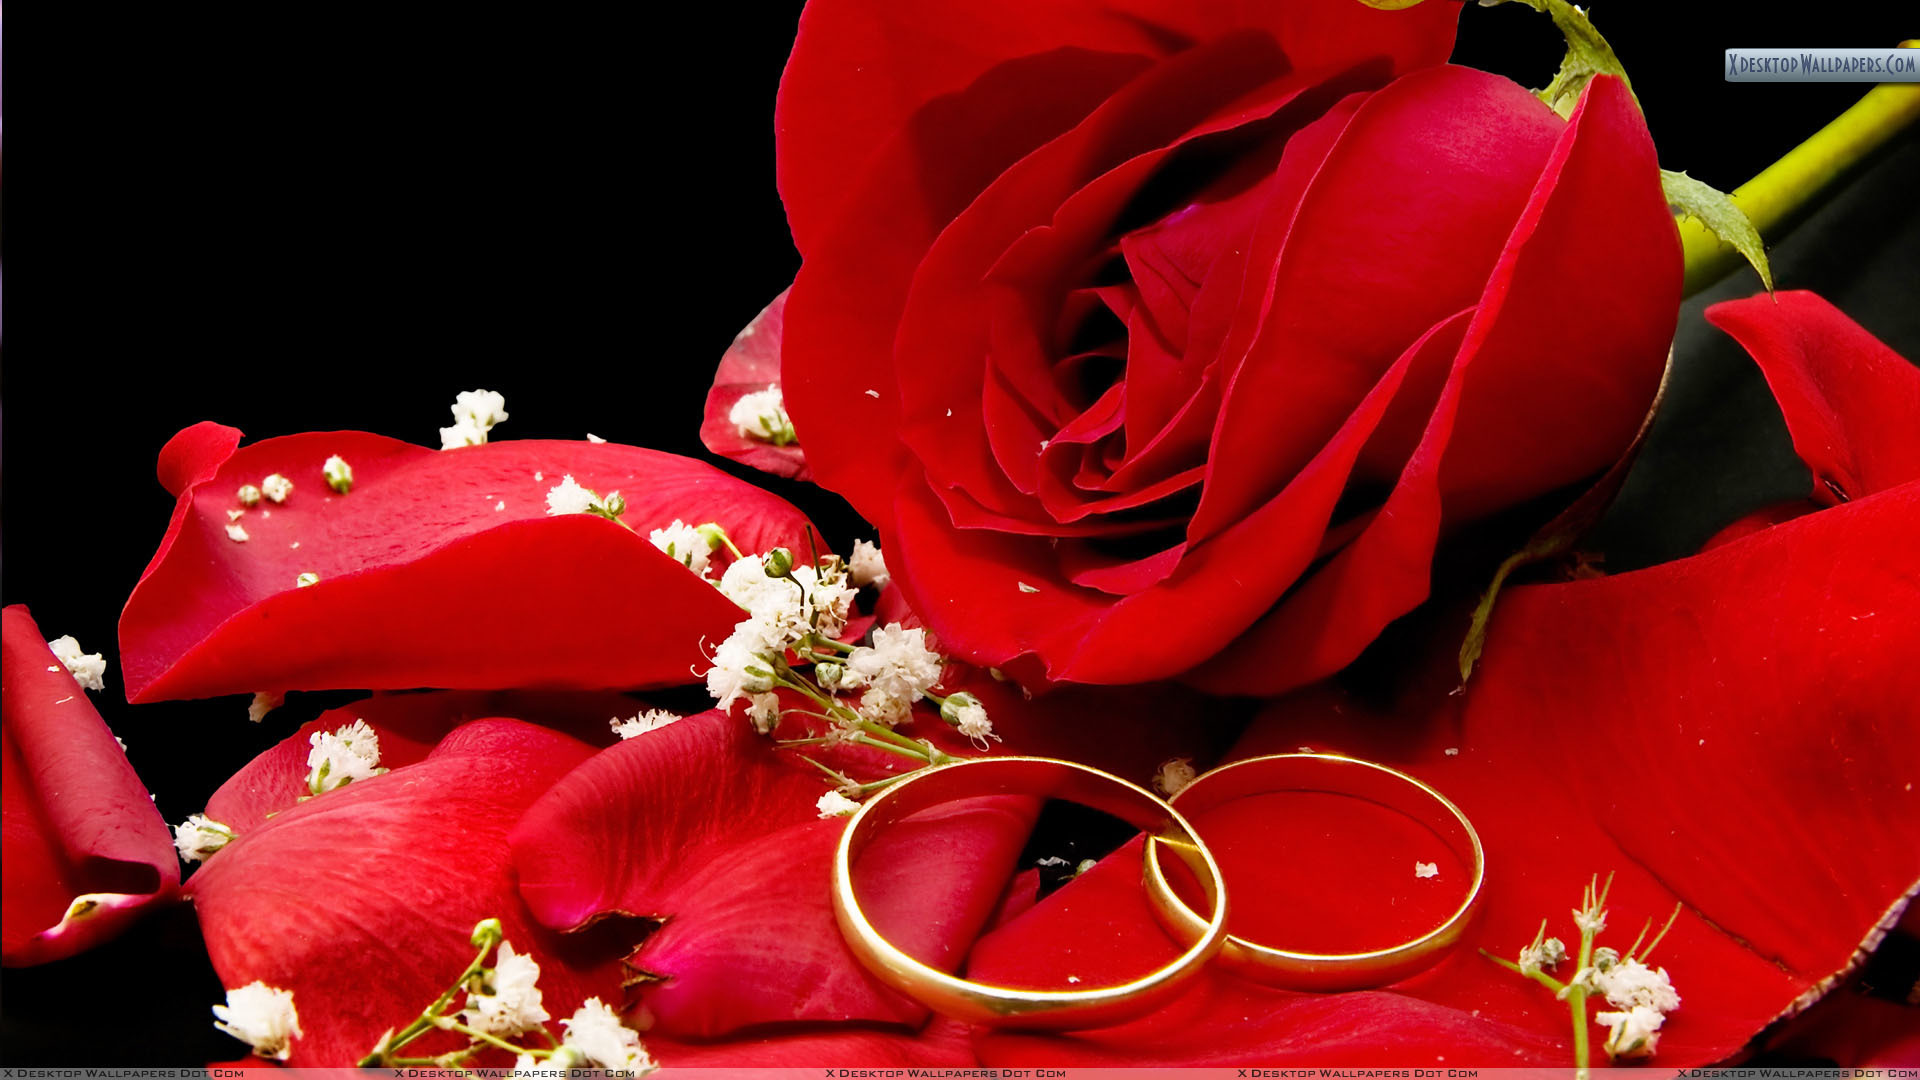 Red rose and wedding rings on a black background desktop wallpapers x